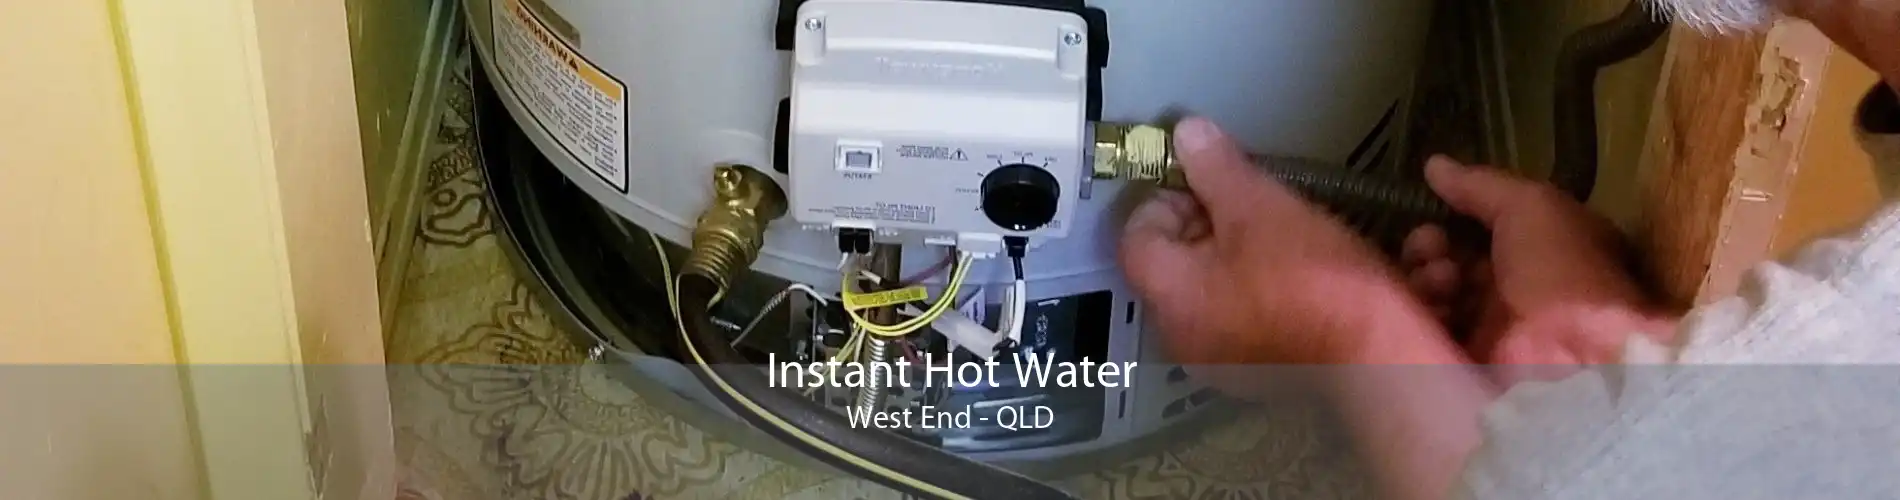 Instant Hot Water West End - QLD